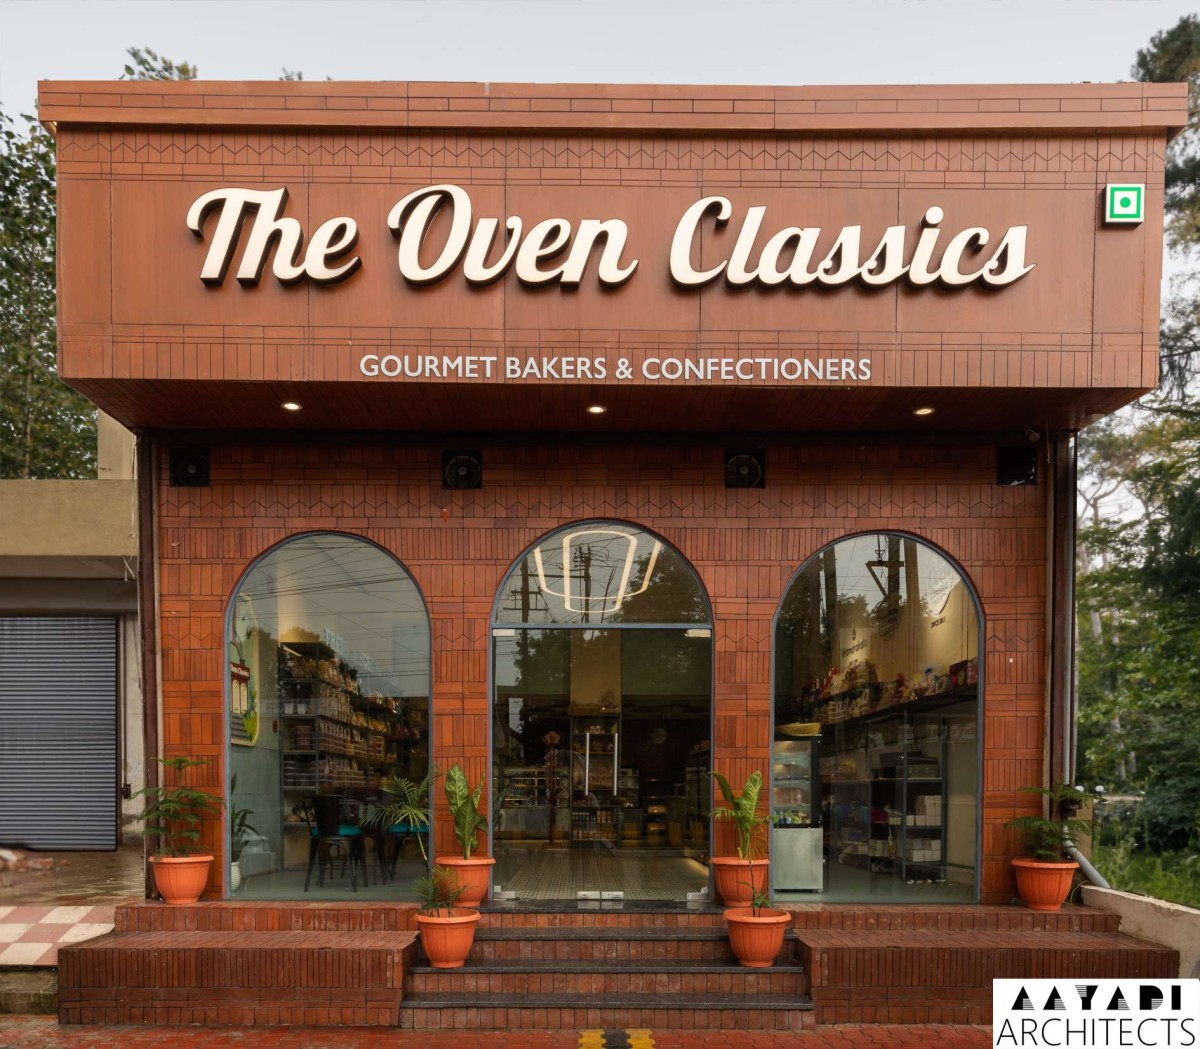 Exterior view of The Oven Classics by Aayadi Architects